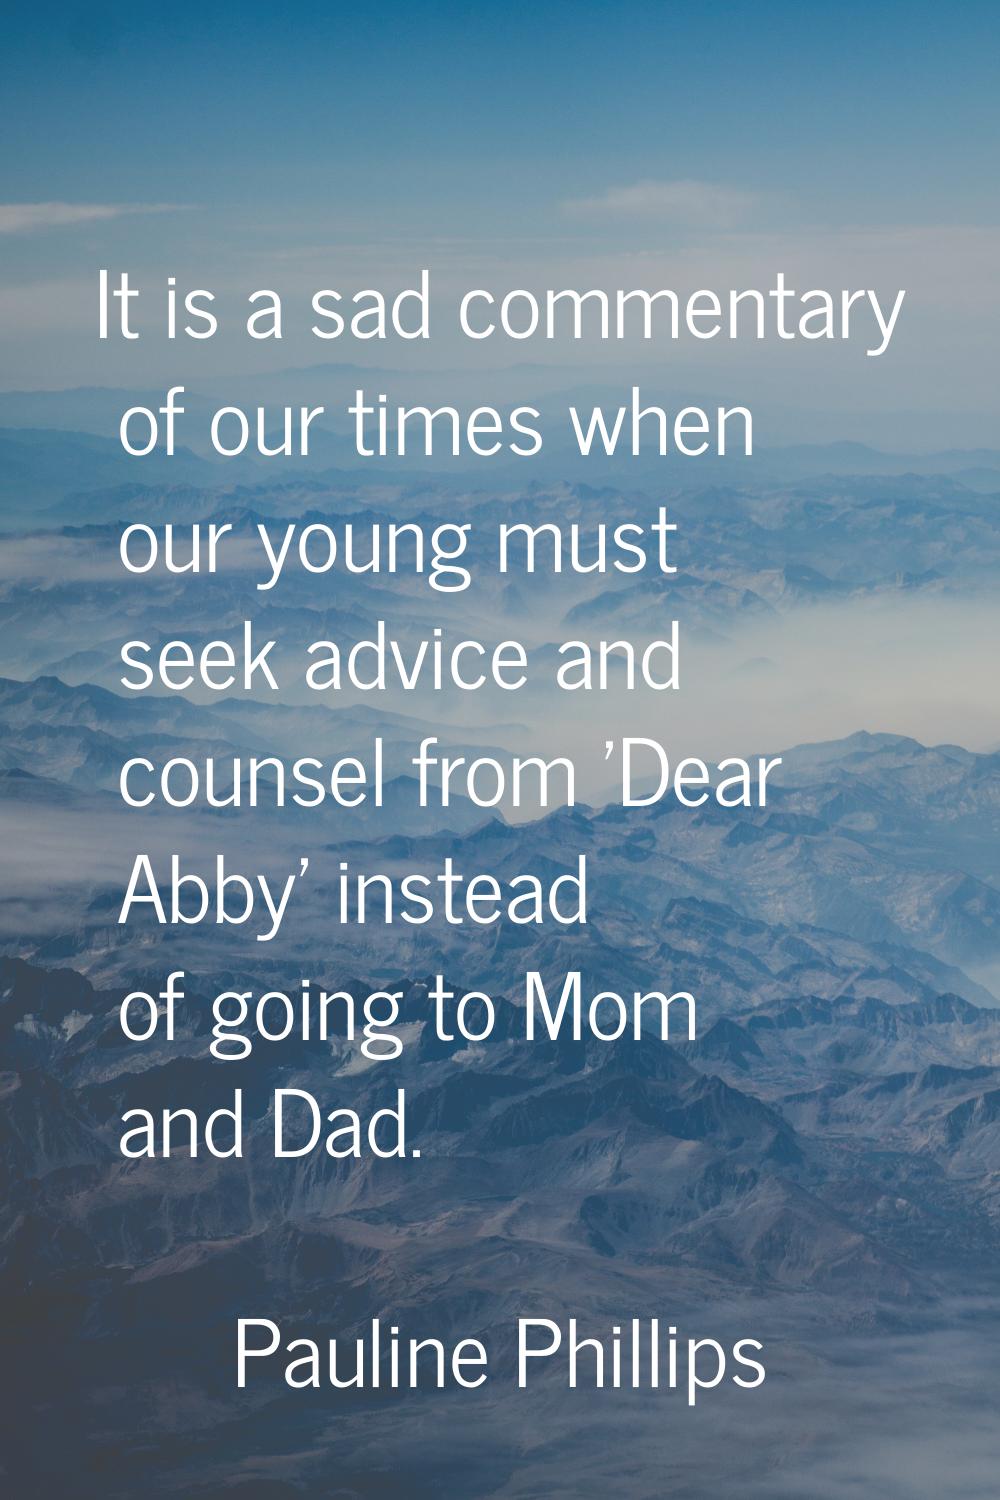 It is a sad commentary of our times when our young must seek advice and counsel from 'Dear Abby' in